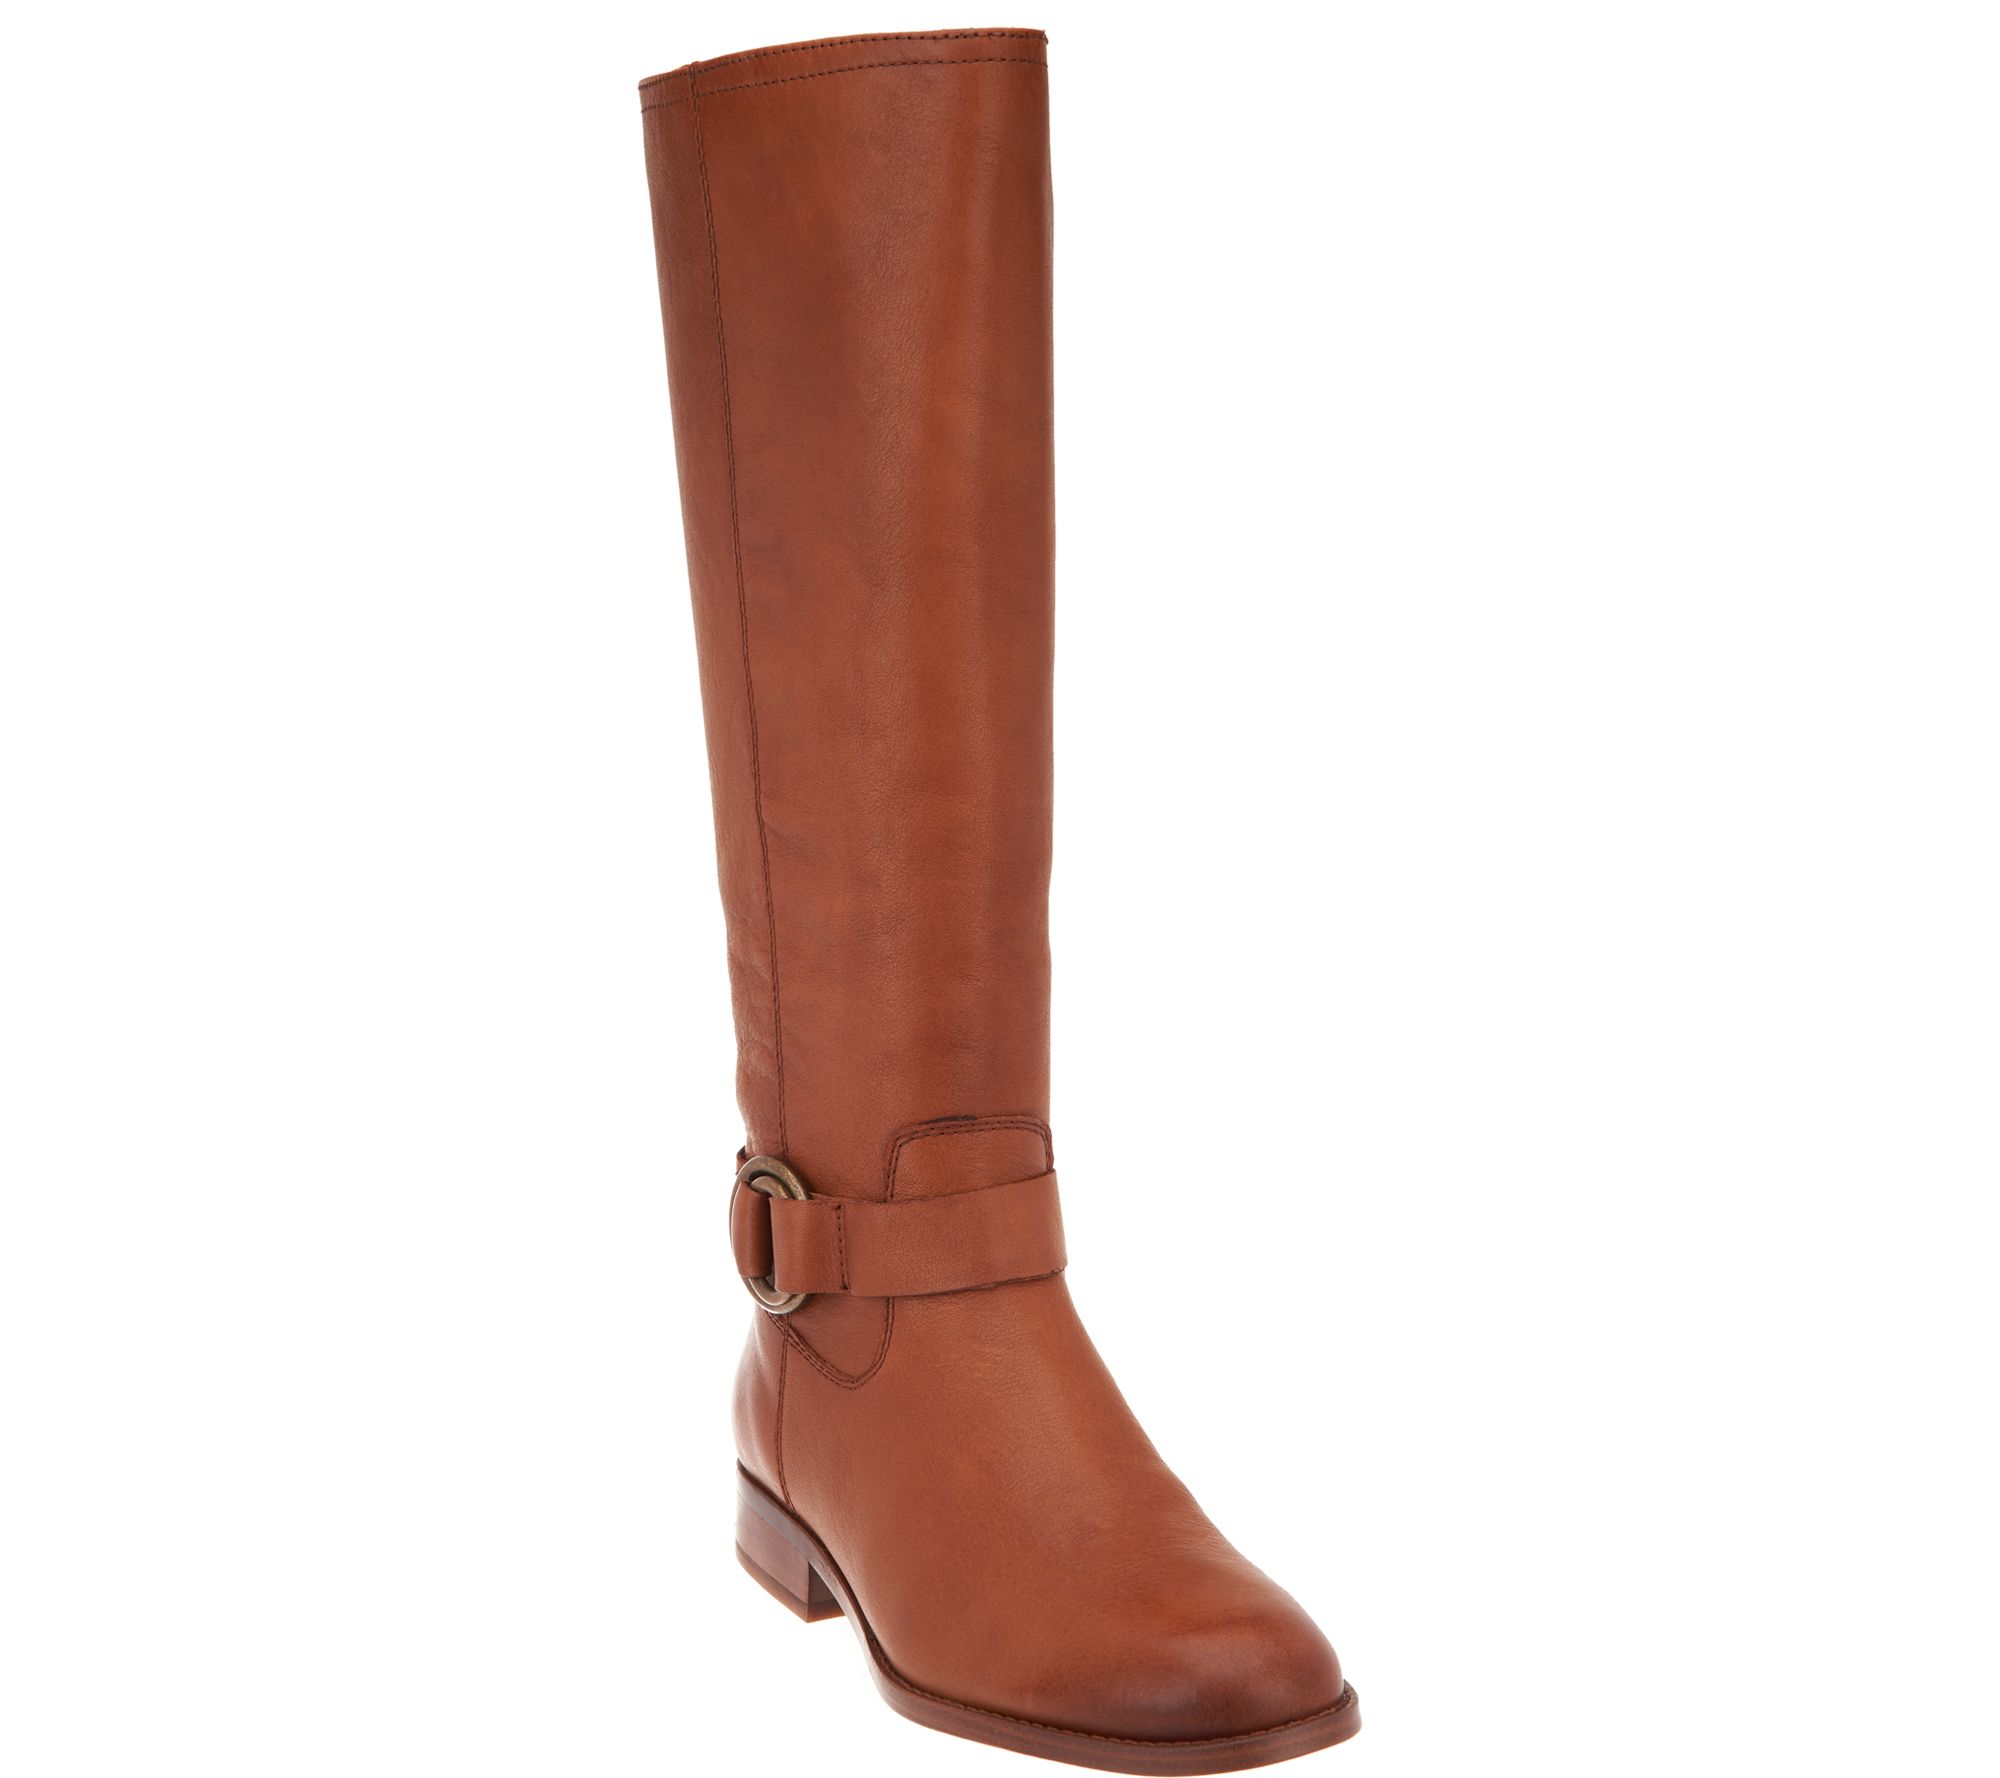 frye & co. Medium Calf Leather Side Zip Tall Boots - Adelaide - QVC.com